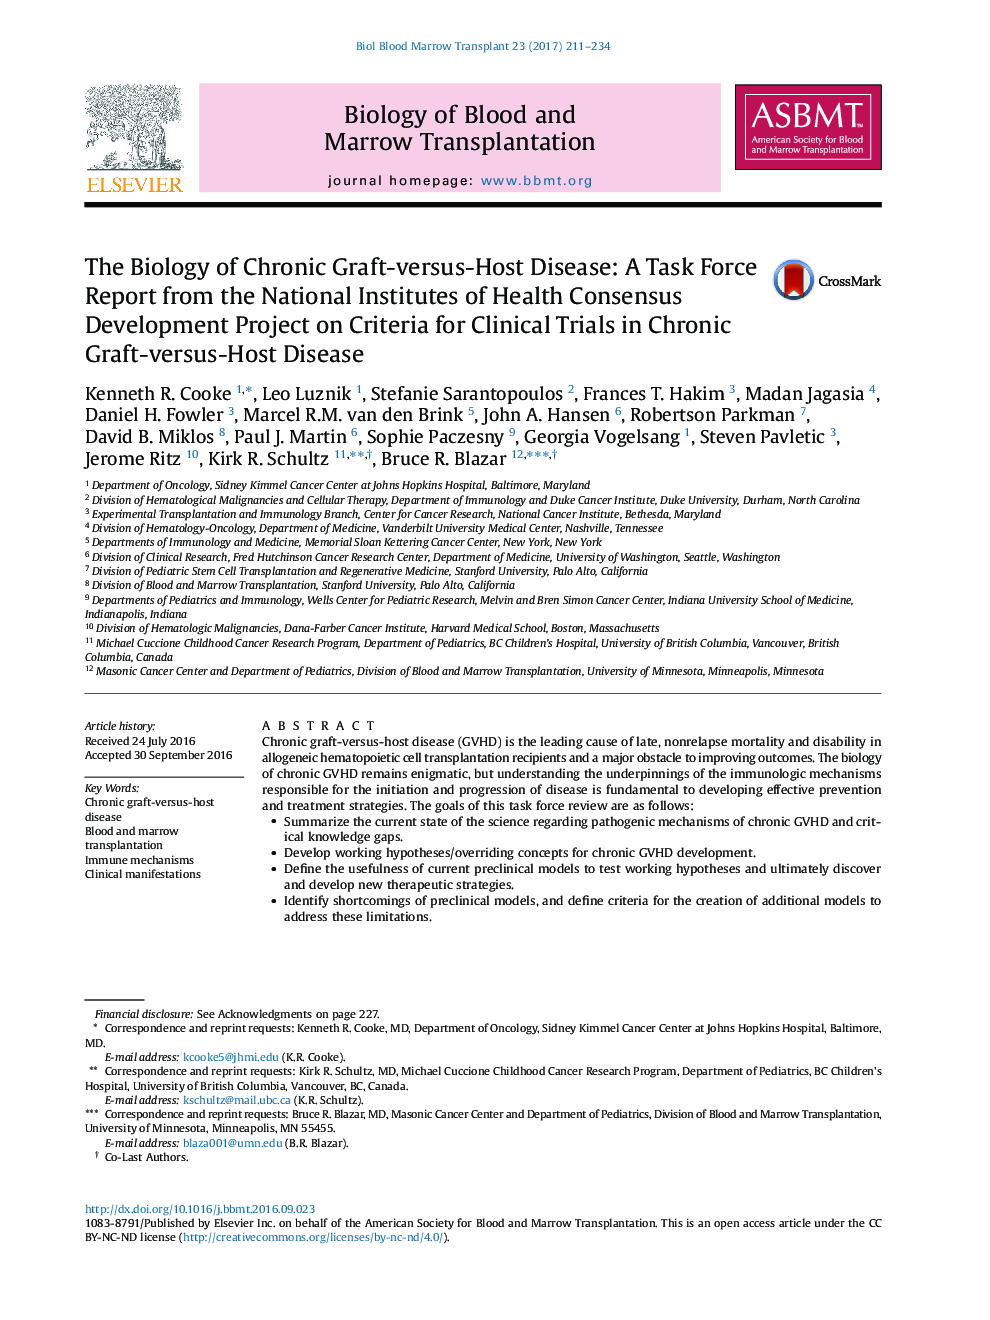 The Biology of Chronic Graft-versus-Host Disease: A Task Force Report from the National Institutes of Health Consensus Development Project on Criteria for Clinical Trials in Chronic Graft-versus-Host Disease